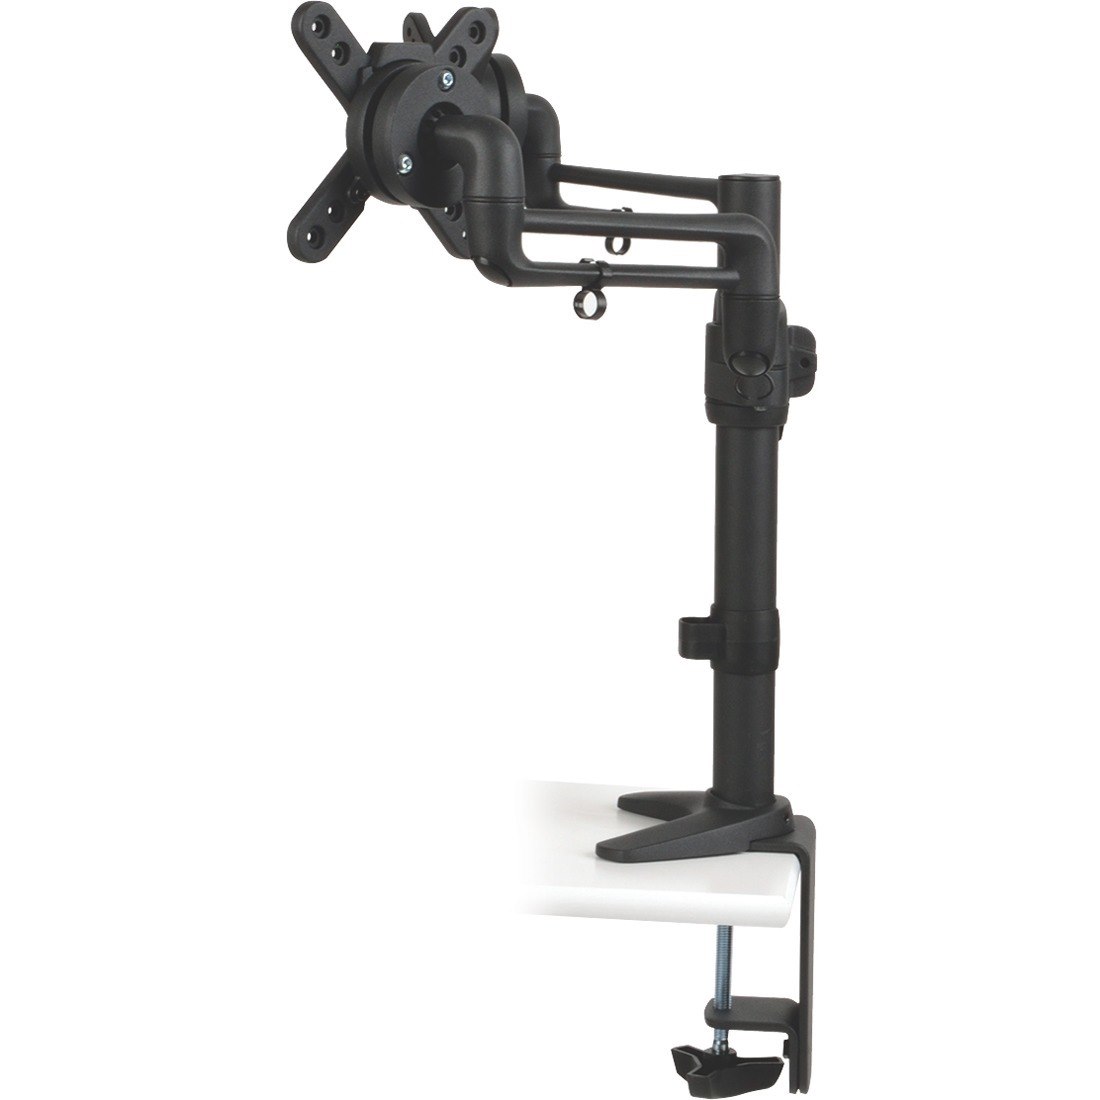 Tripp Lite by Eaton Dual Full Motion Flex Arm Desk Clamp for 13" to 27" Monitors